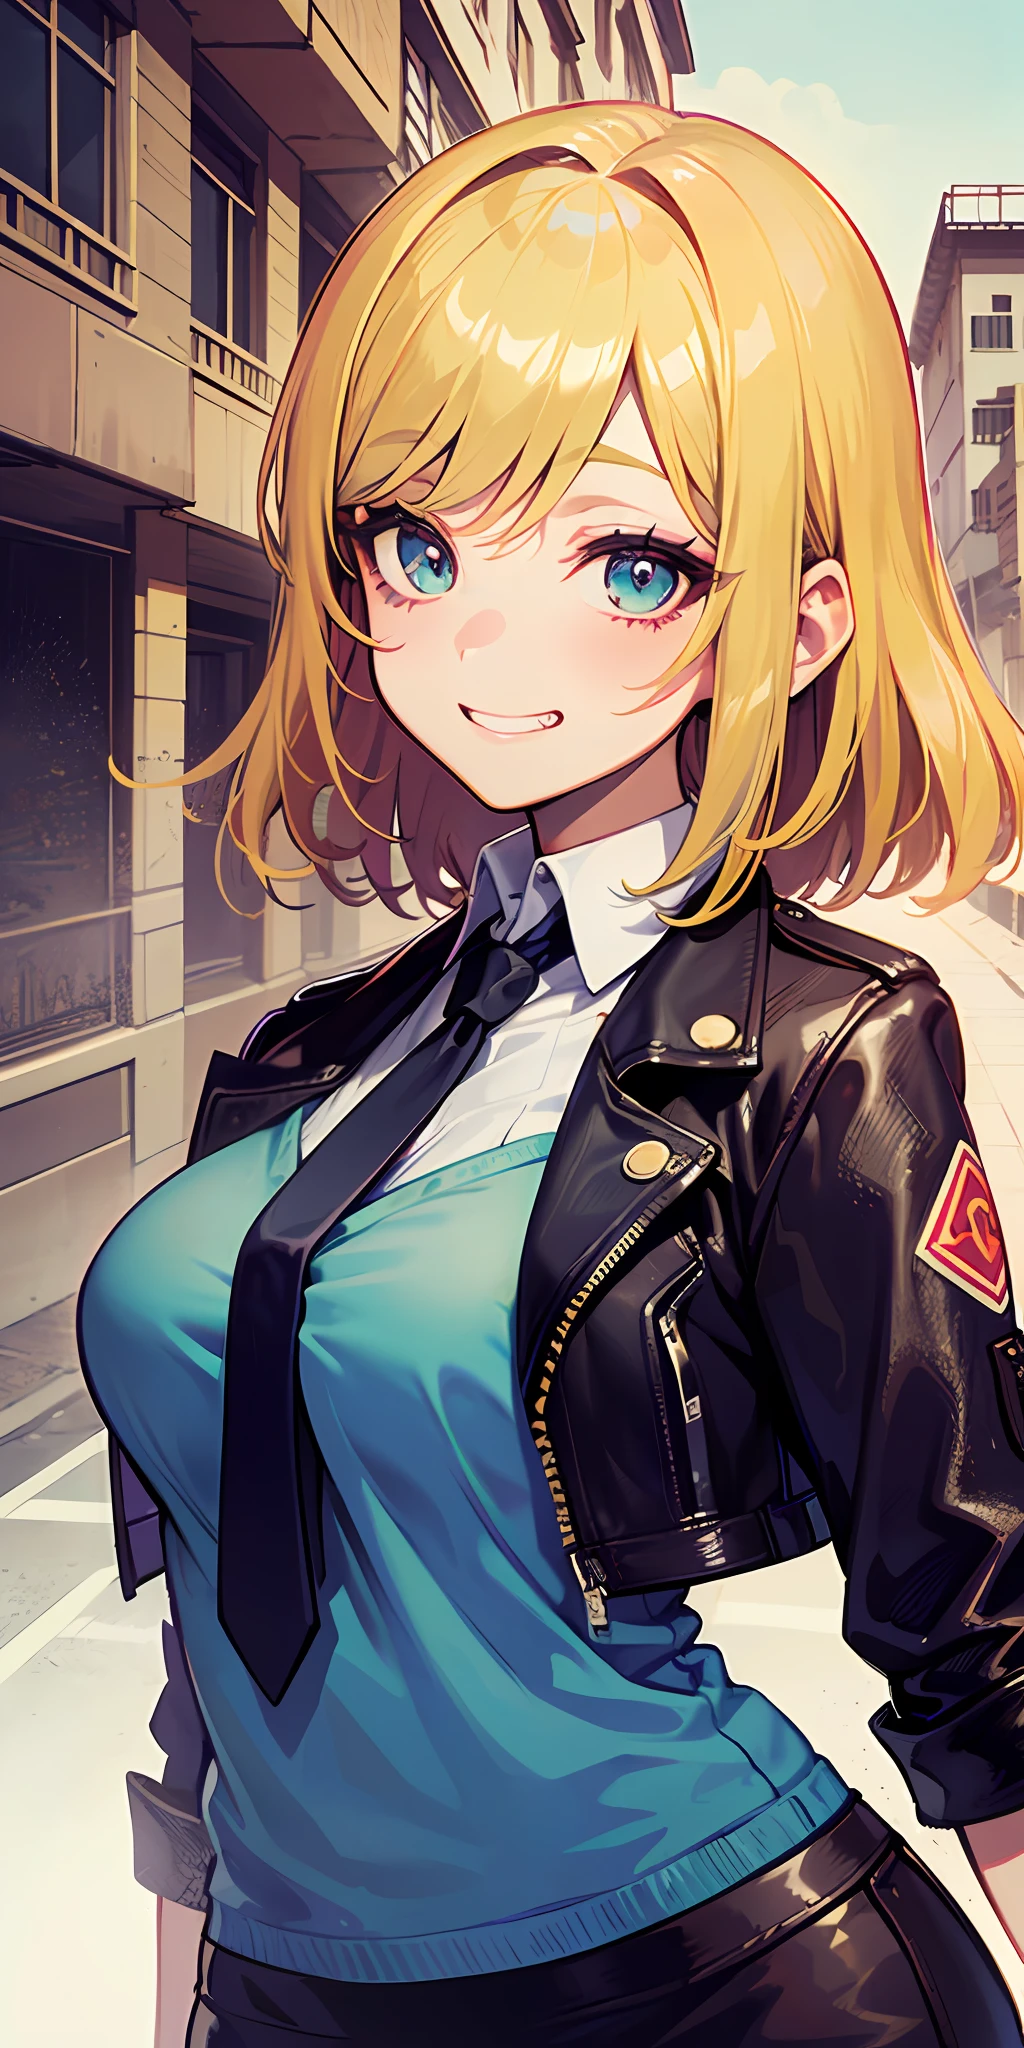 (​masterpiece:1.6、top-quality)、(Fine and beautiful eyes: 1.2)、(looking-down)、hightquality、beautiful countenance、1girl in、Leather tight skirt、Oversized leather jacket, large boob, long, wide-hips, (sideways Facing, ), Street, Background with, detailedbackground,Creepy grin、Laughter at the corners of his mouth、long court、Shirt、neck tie、OL、A MILF、a blond